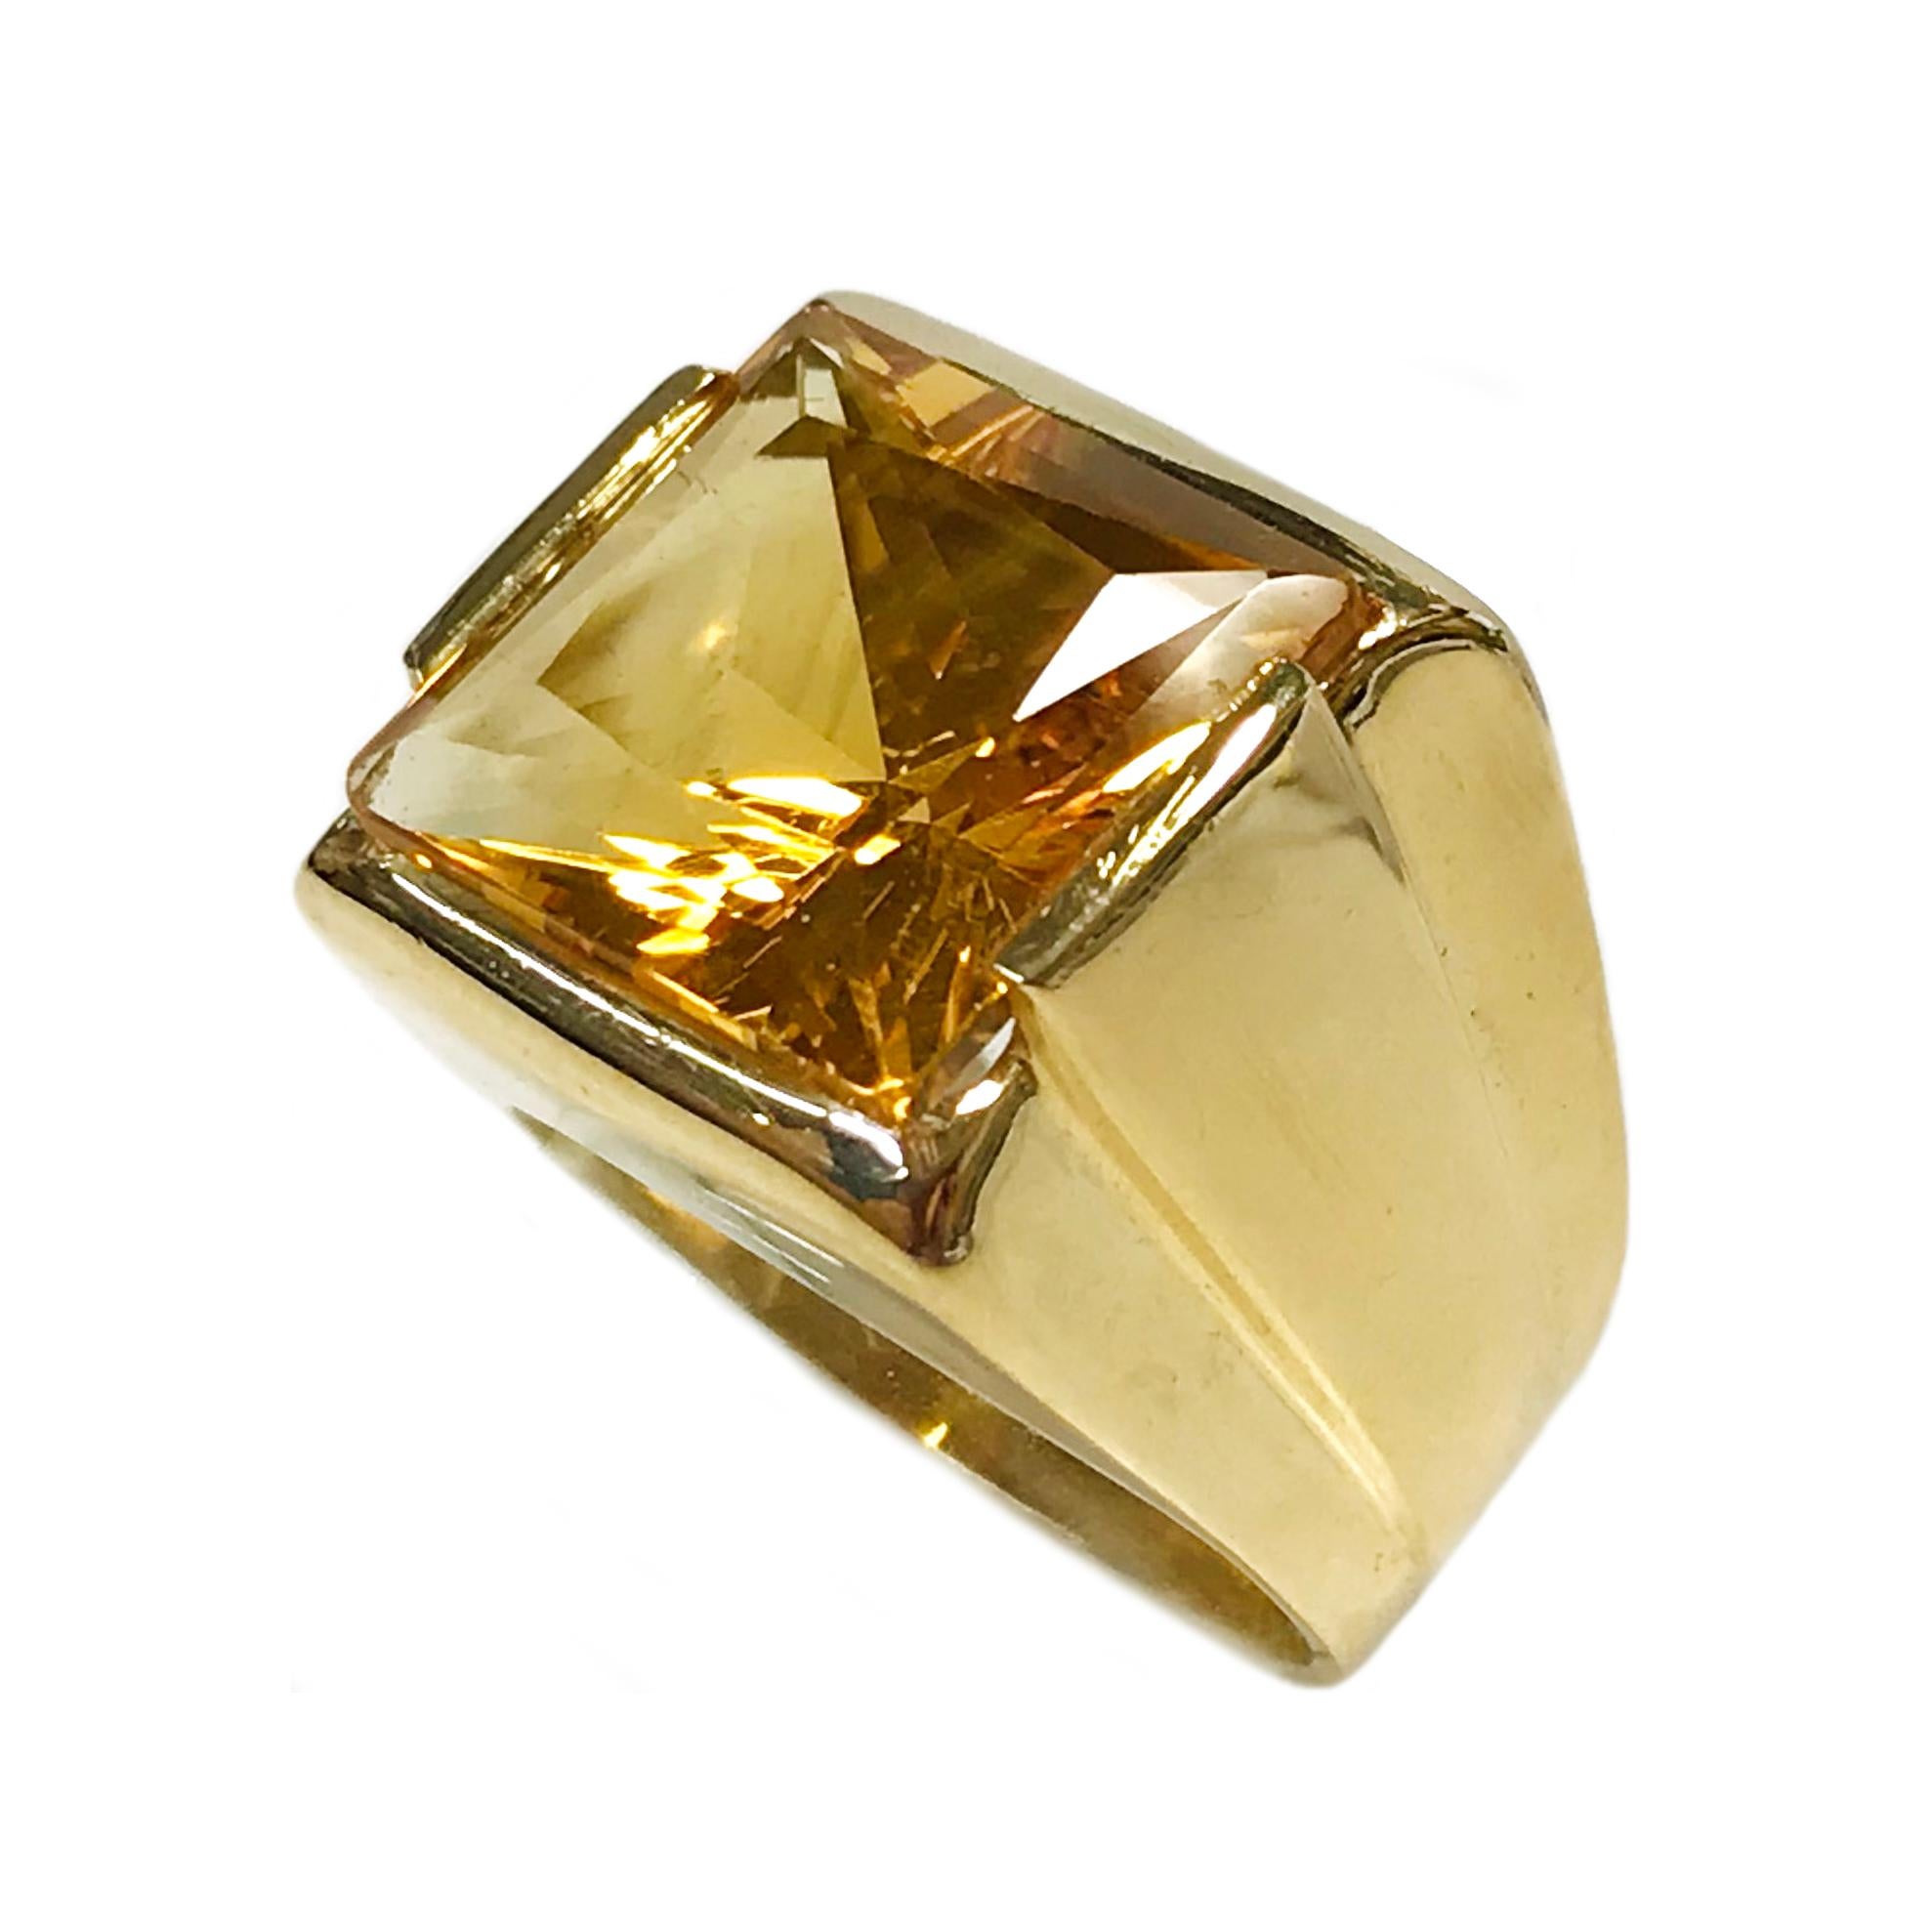 18 Karat Yellow Gold Citrine Ring. The ring features a 13.4mm square bezel-set step-cut Citrine. The wide-band tapers and has a smooth shiny finish. The ring size is 6. The total gold weight of the ring is 13.05 grams.